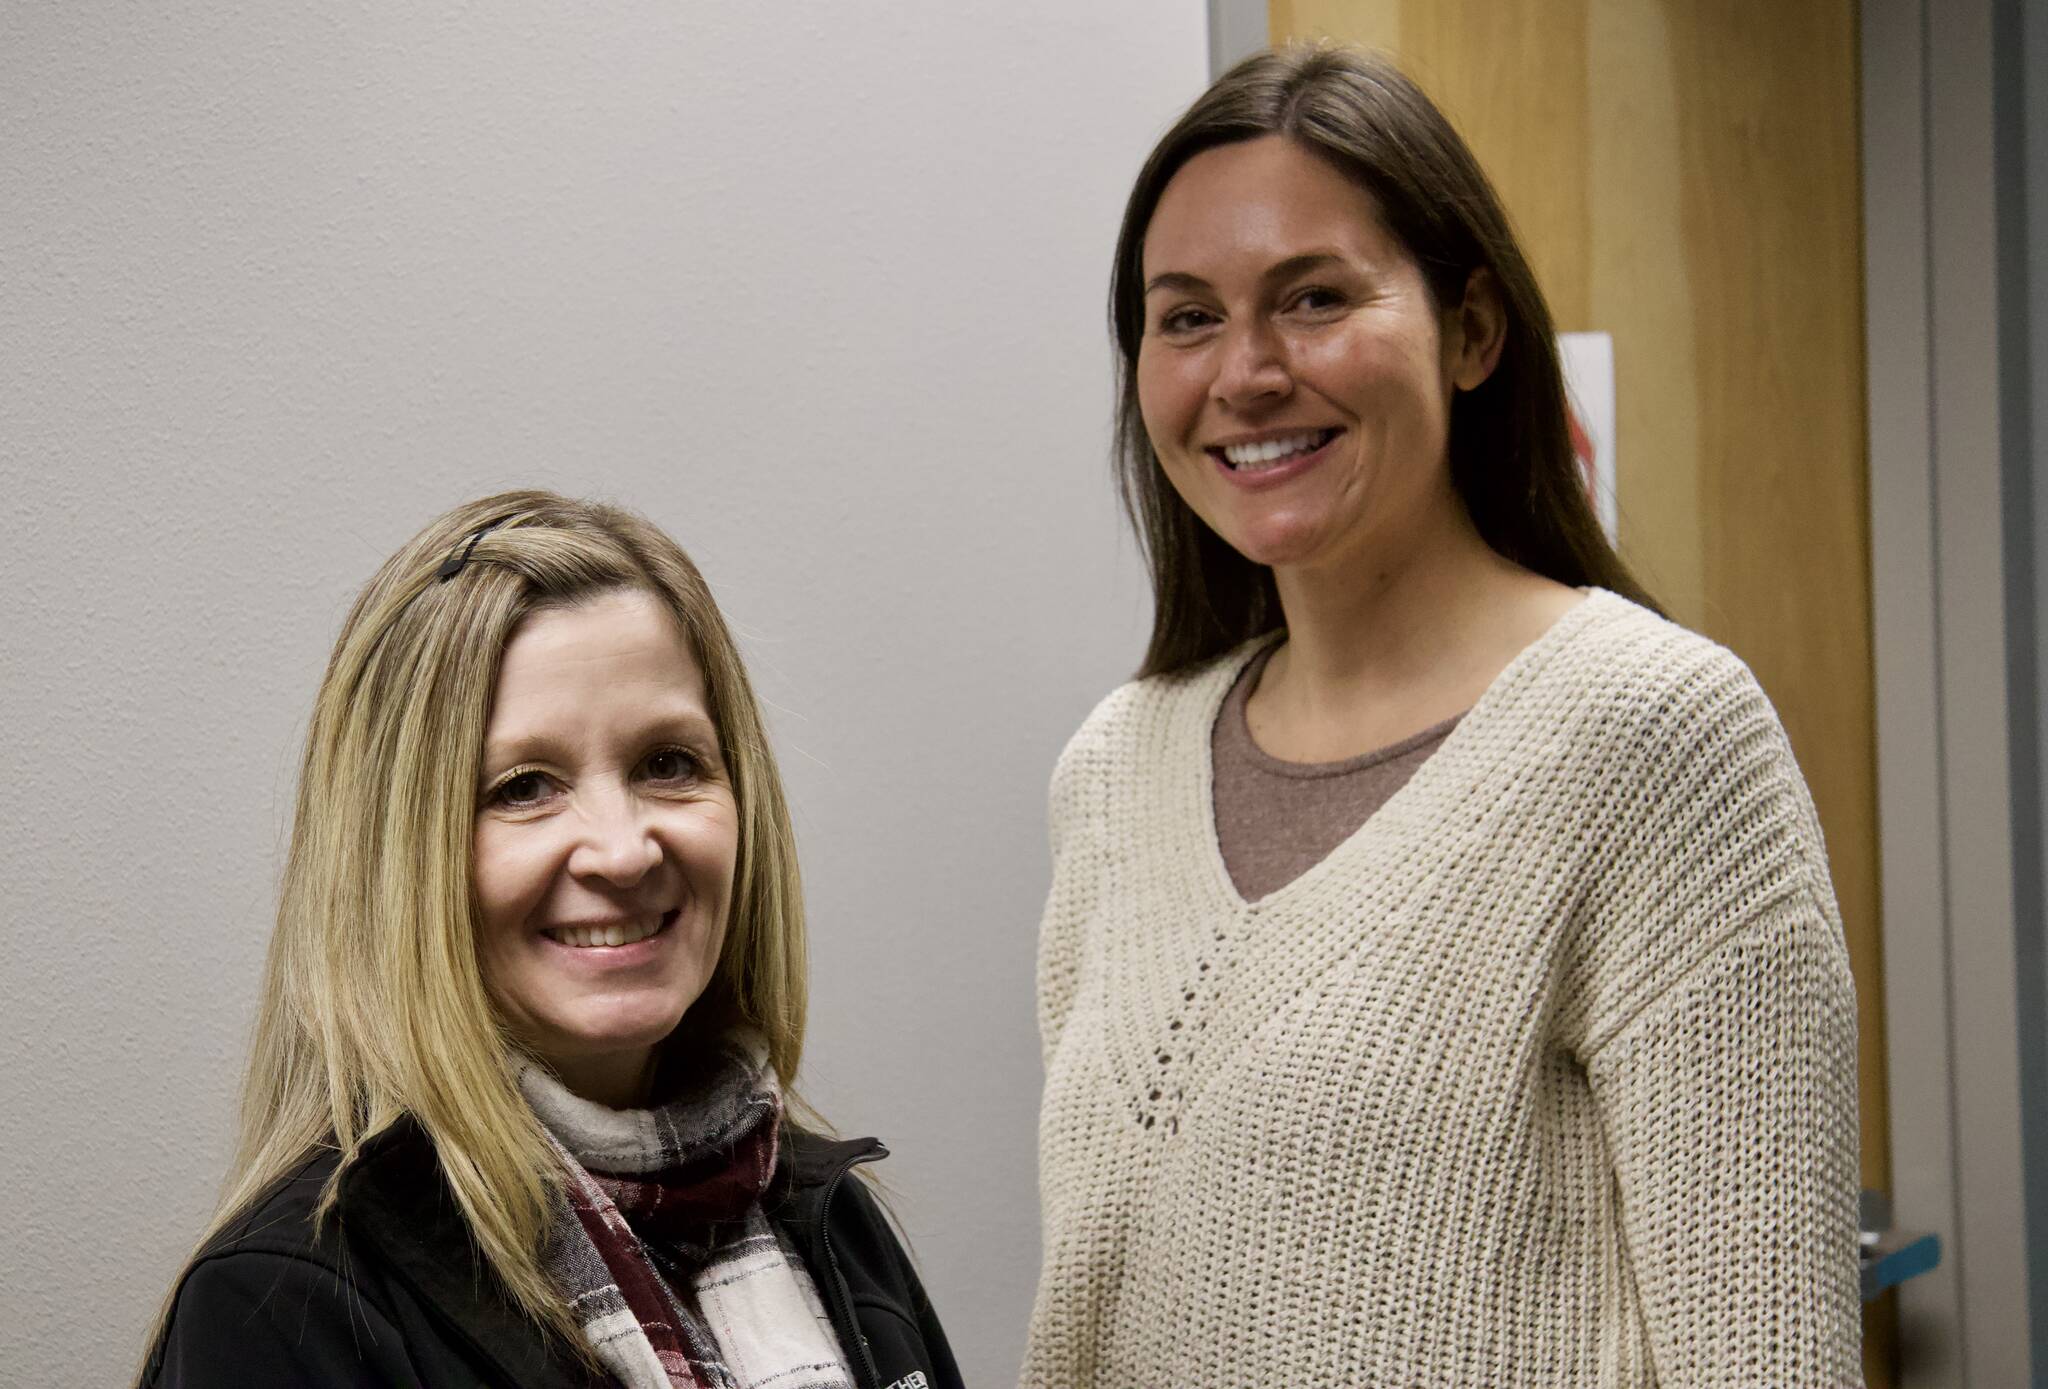 Photo by Rachel Rosen/Whidbey News-Times
From left, Stephanie Martin is the operations manager for the BlueSprig location in Oak Harbor and Kim Kokias is the clinical director.